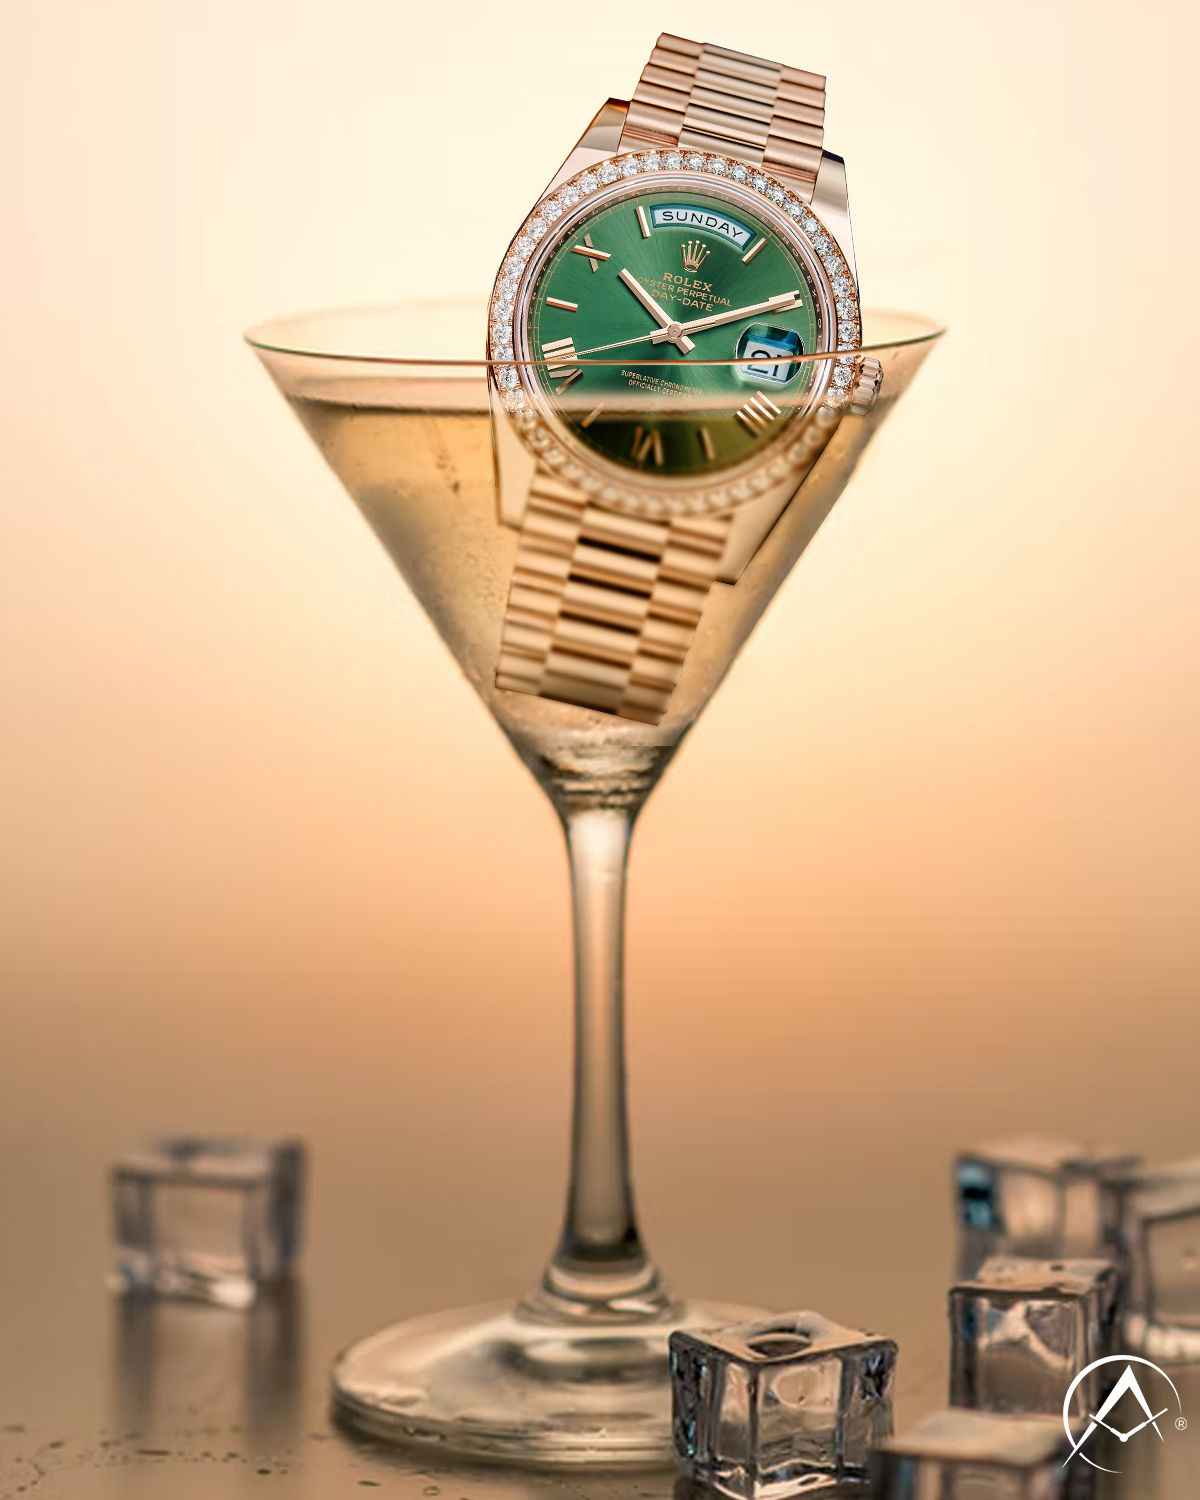 Rolex Day-Date with Green Dial, Date Aperture, Roman Dials, Diamond Bezel and Rose Gold Bracelet Sits in a Filled Martini Glass with Ice Cubes on the Ground